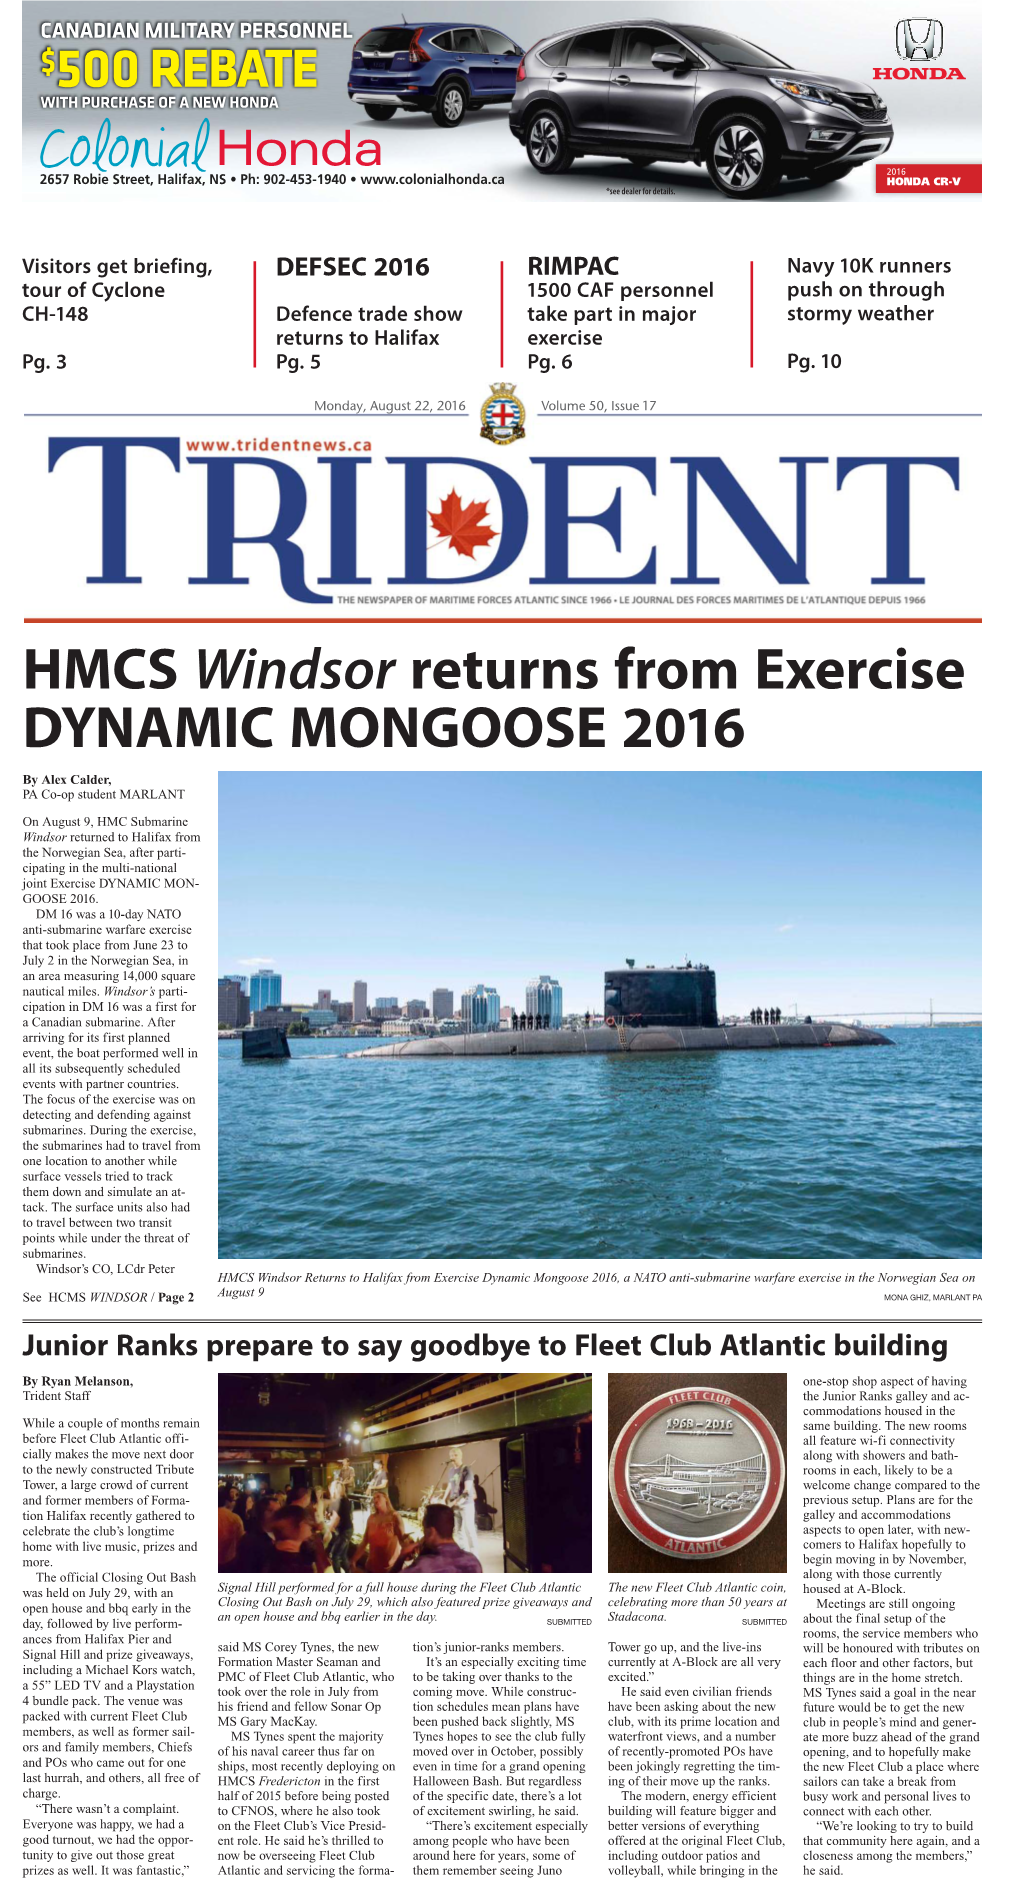 HMCS Windsor Returns from Exercise DYNAMIC MONGOOSE 2016